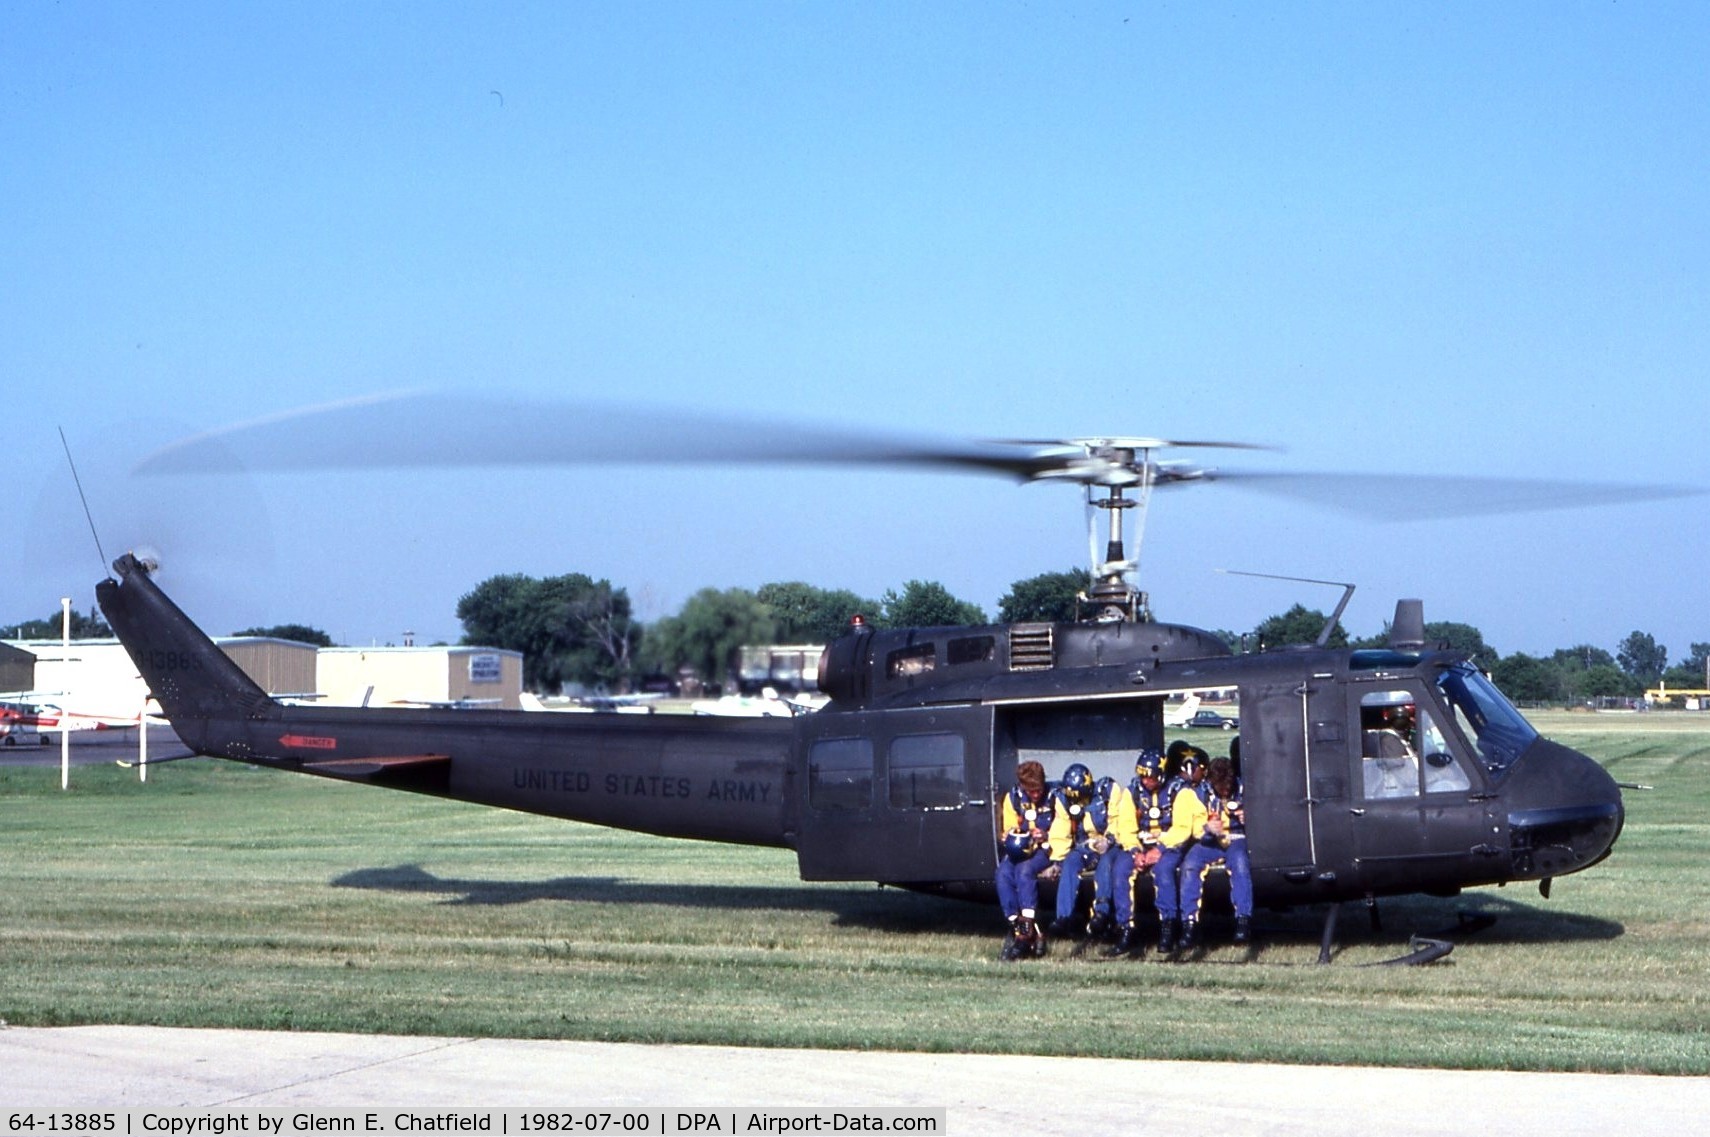 64-13885, 1964 Bell UH-1H Iroquois C/N 4592, UH-1H with Navy parachute team.  This Huey saw combat in Vietnam.